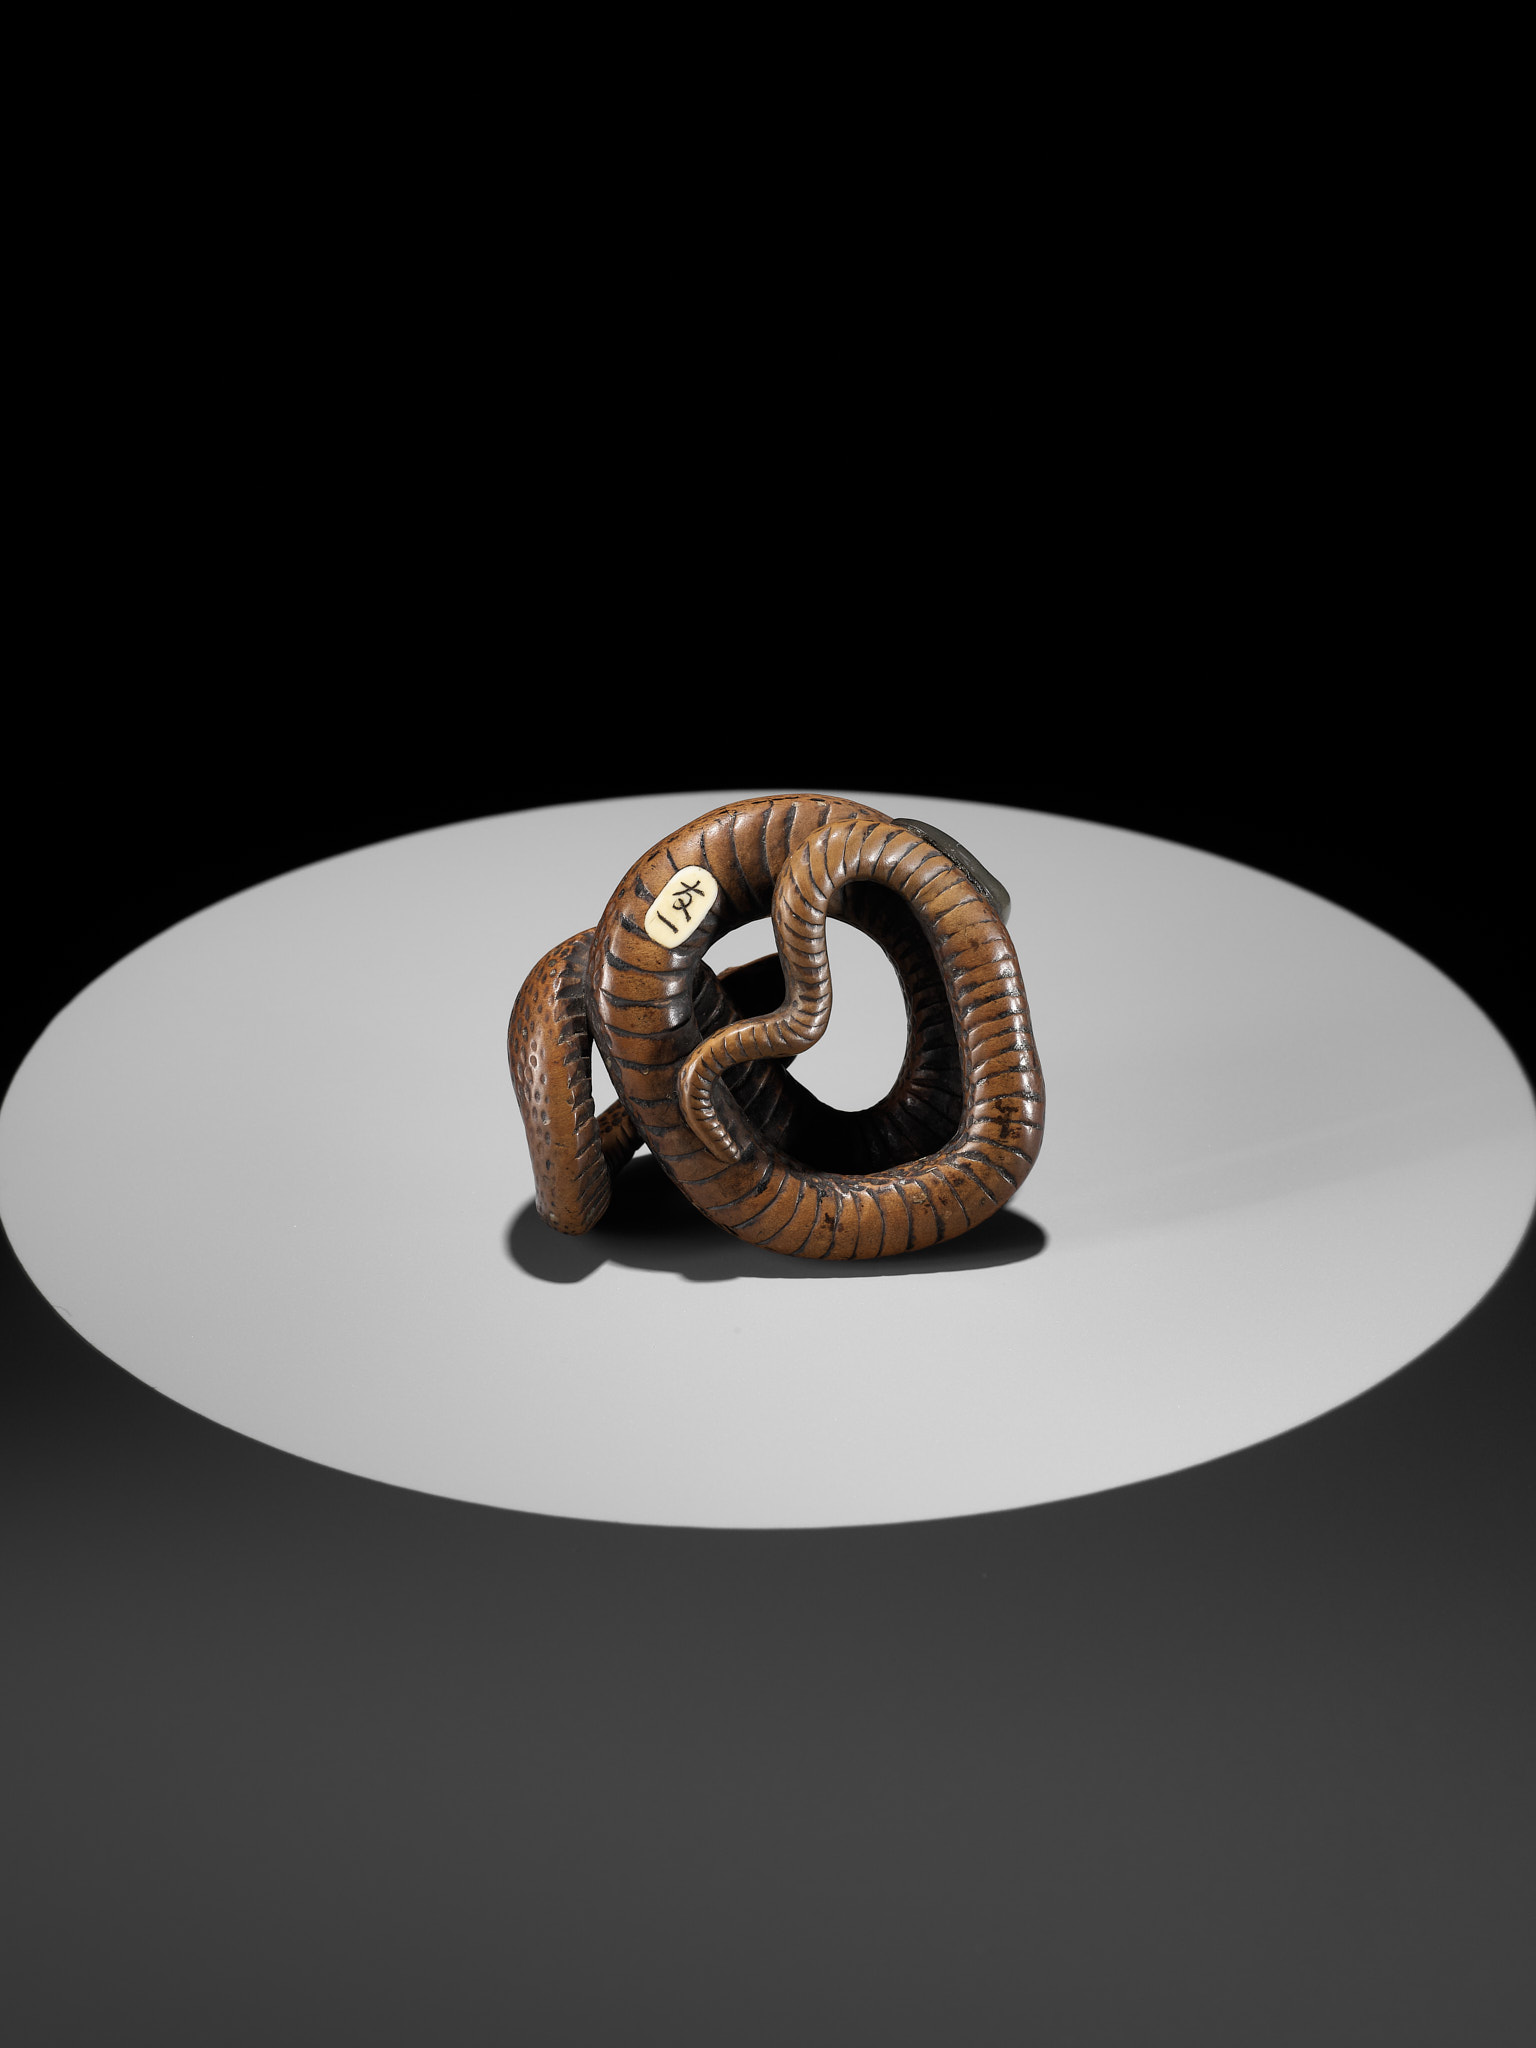 A LARGE AND POWERFUL WOOD NETSUKE OF A COILED SNAKE WITH AN INLAID SLUG BY TOMOKAZU - Image 12 of 13